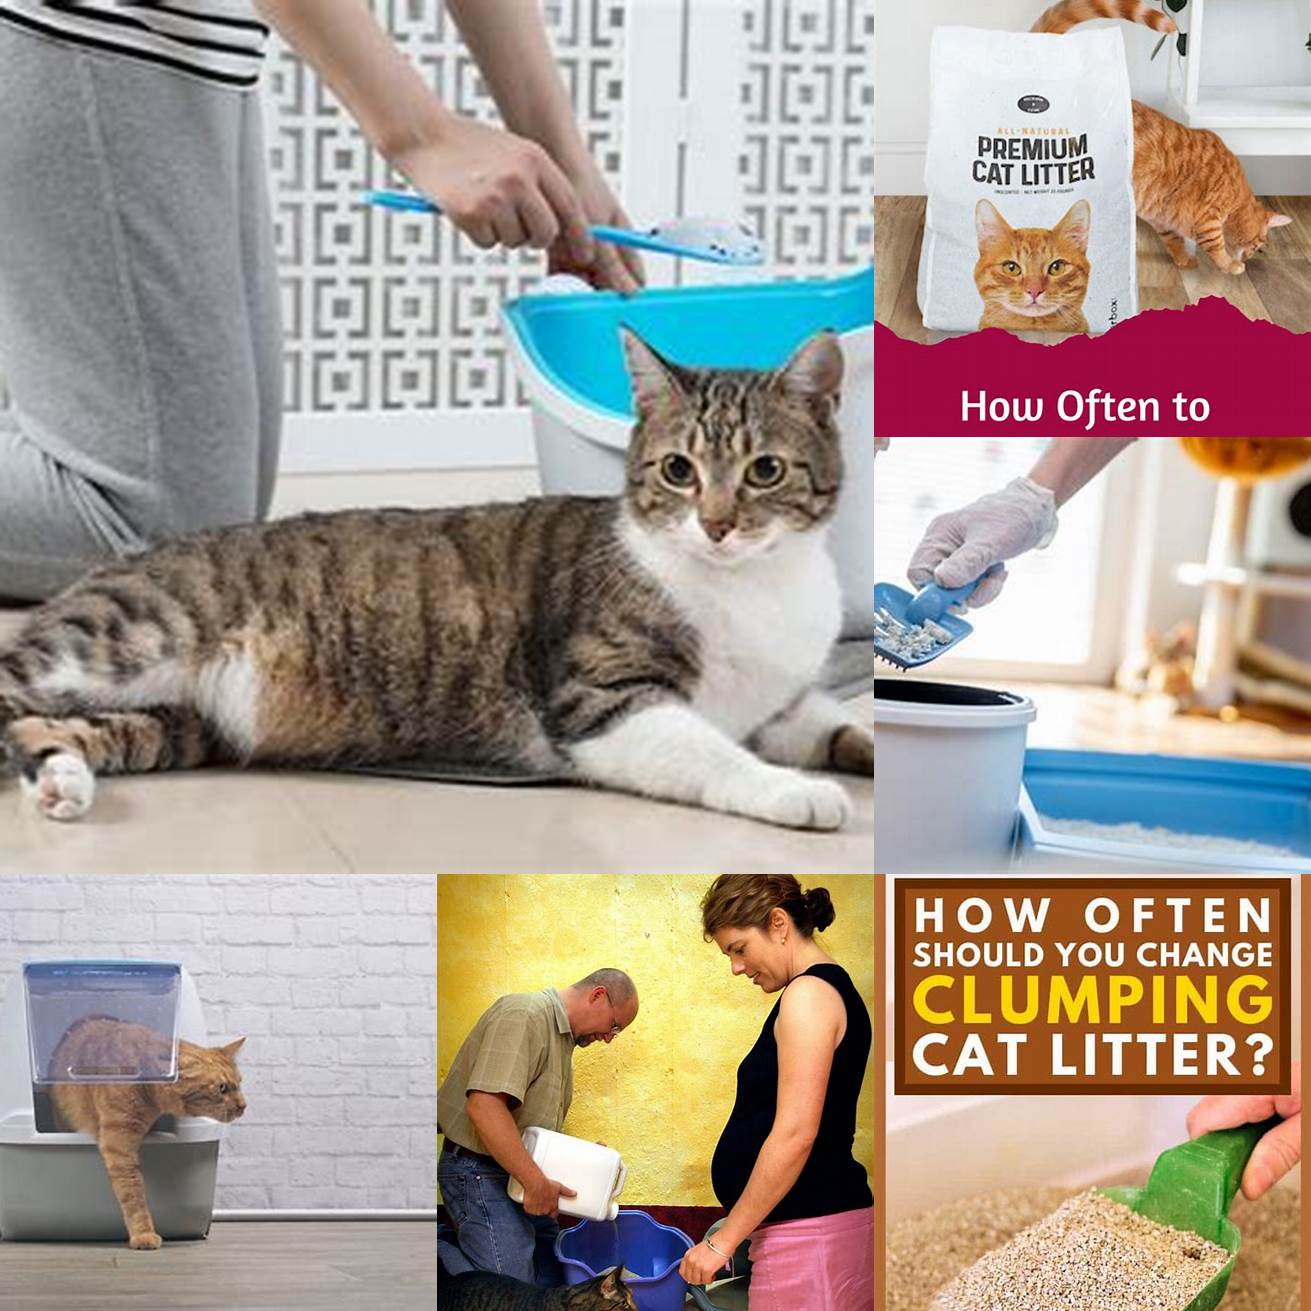 Have someone else change the cat litter if youre pregnant or have a weakened immune system